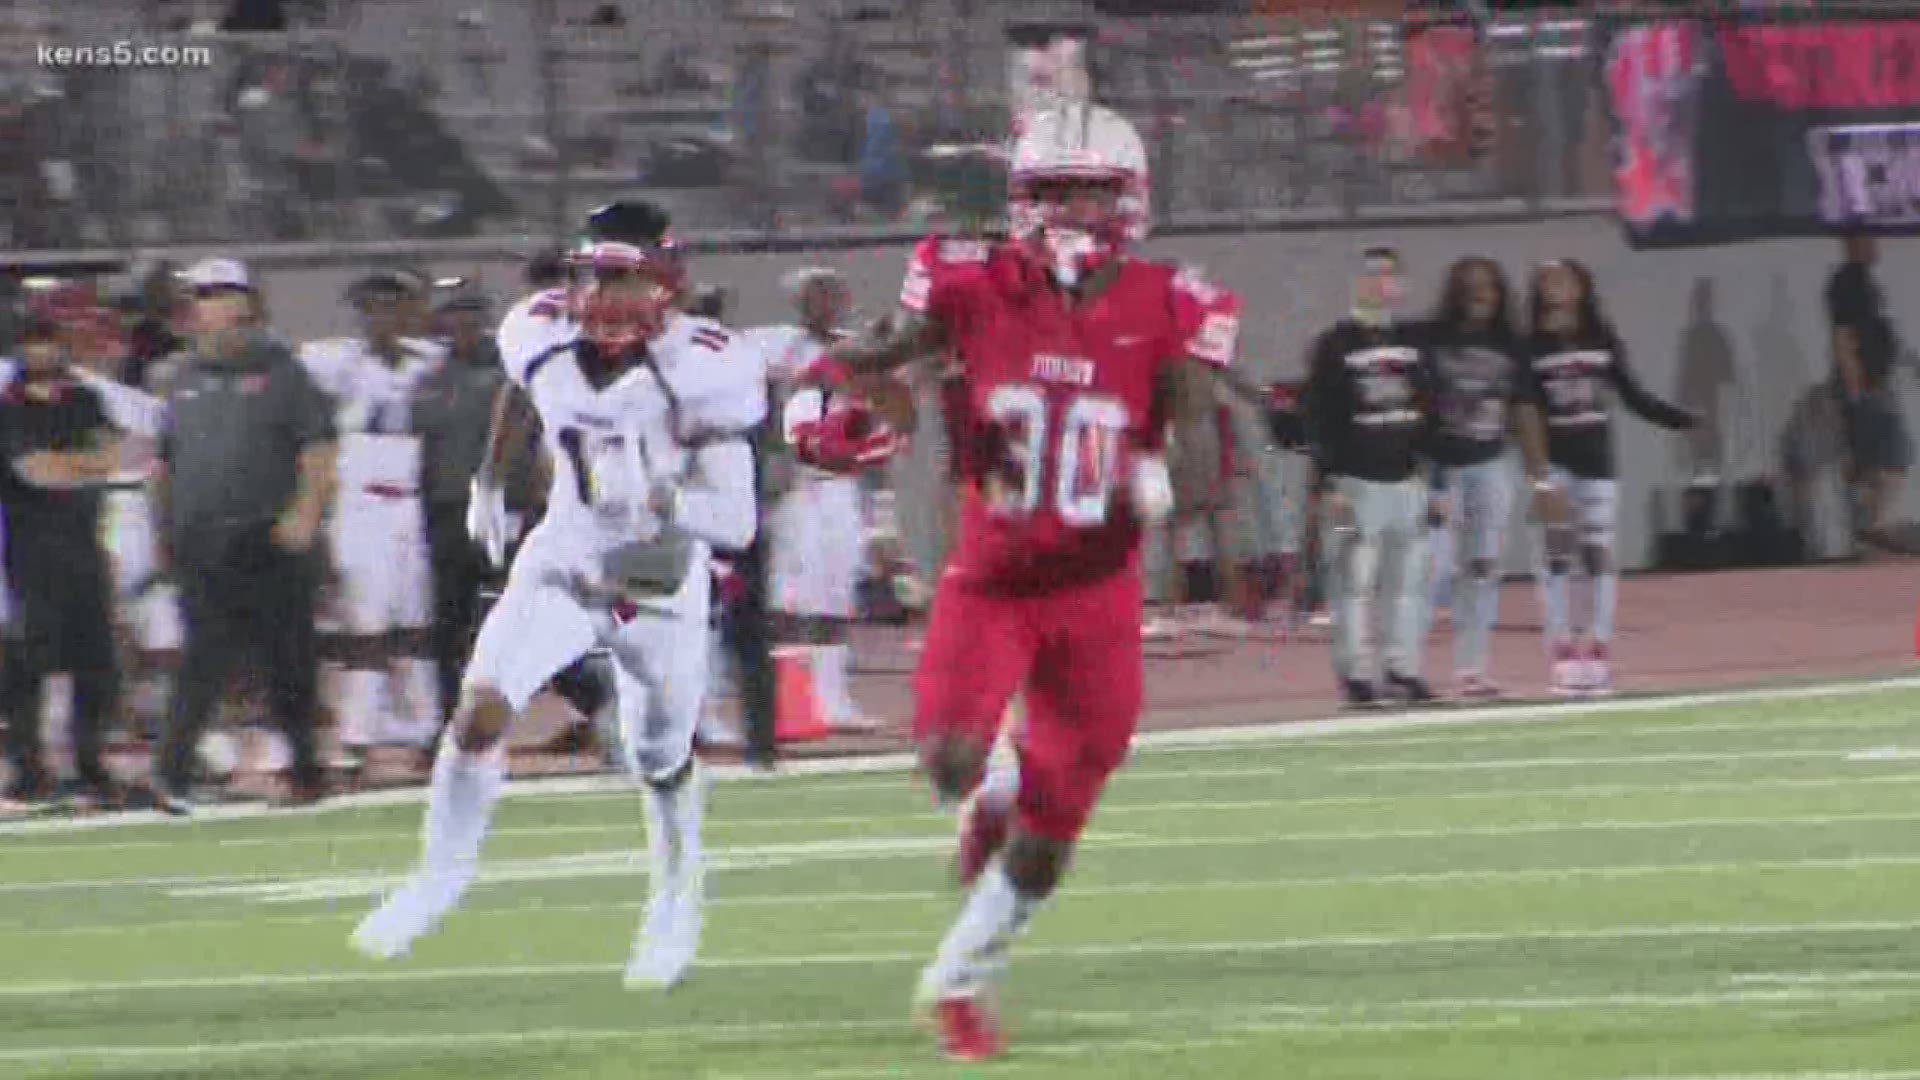 Judson blows out Wagner, Brennan defeats Warren in Week 2 of San Antonio-area gridiron action.